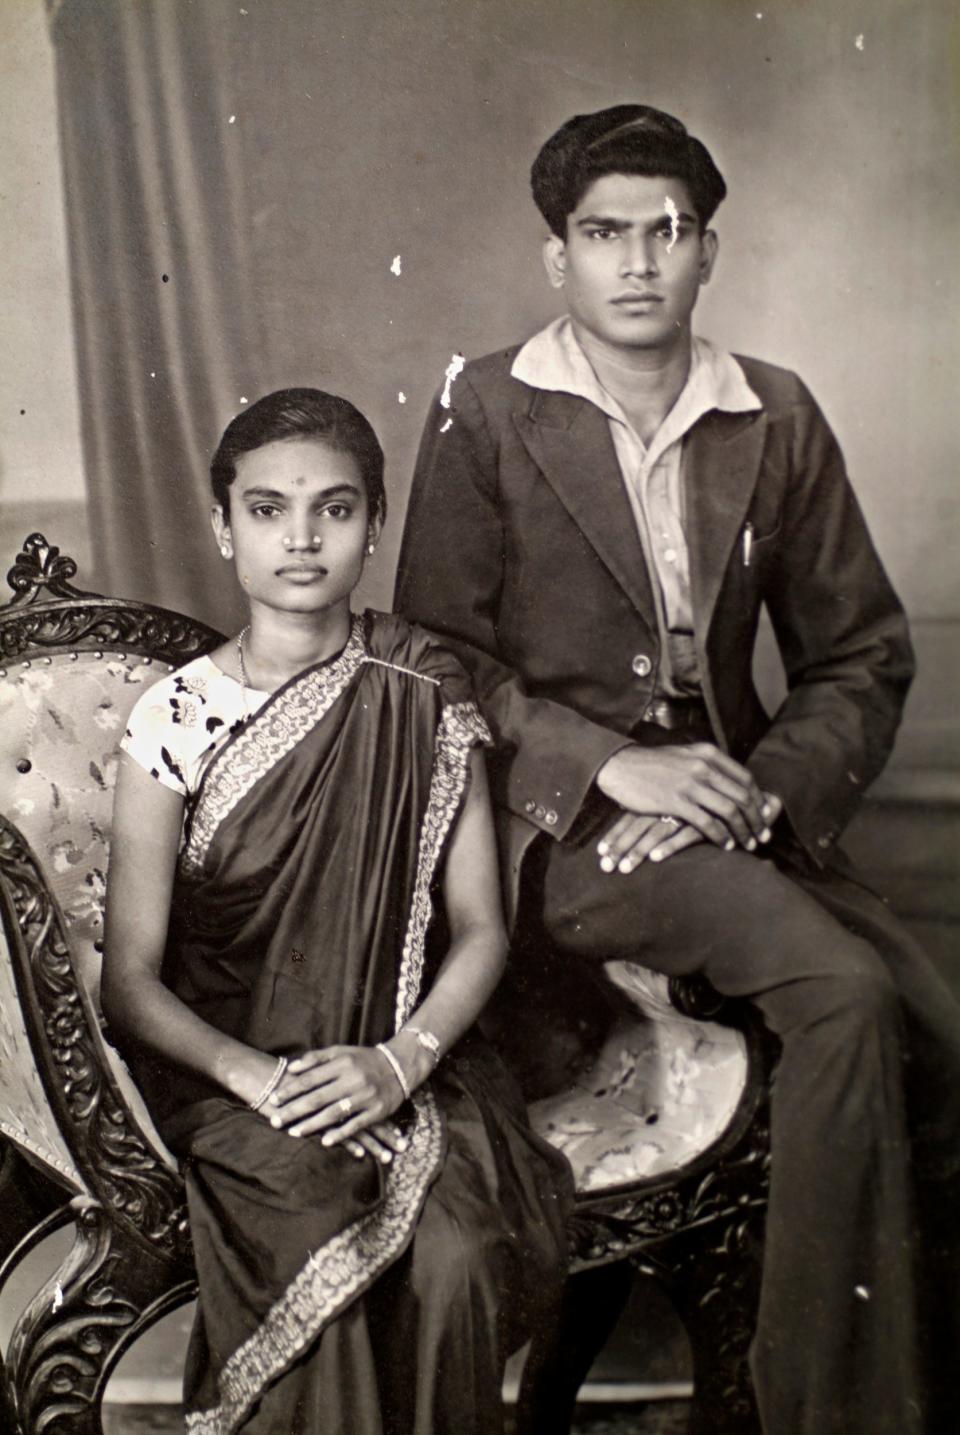 Two Chettians sit in a chair posing for a family photograph.